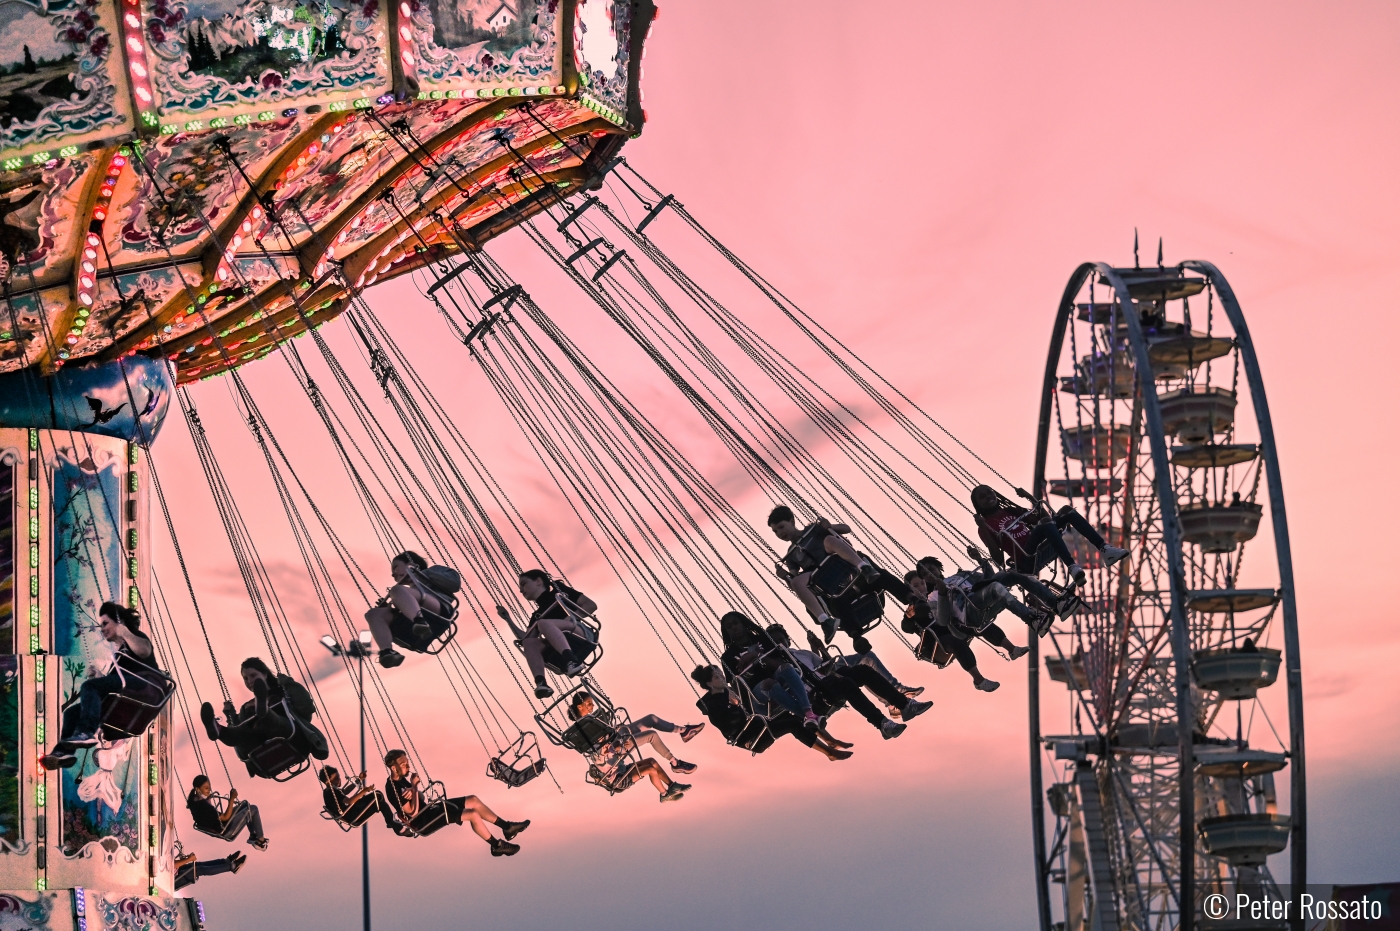 Sunset Carnival Ride by Peter Rossato